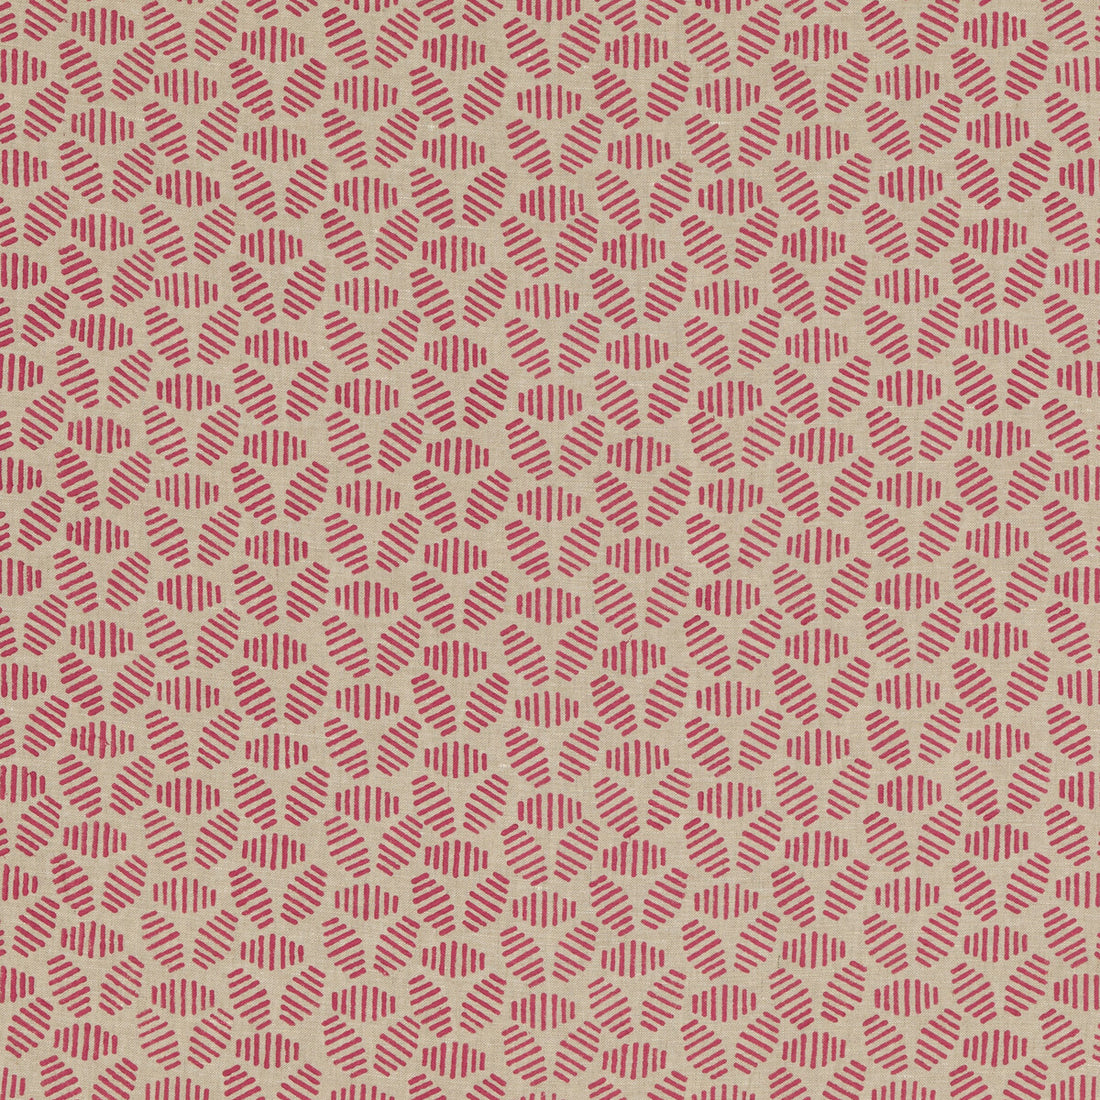 Bumble Bee fabric in fuchsia color - pattern PP50482.6.0 - by Baker Lifestyle in the Block Party collection